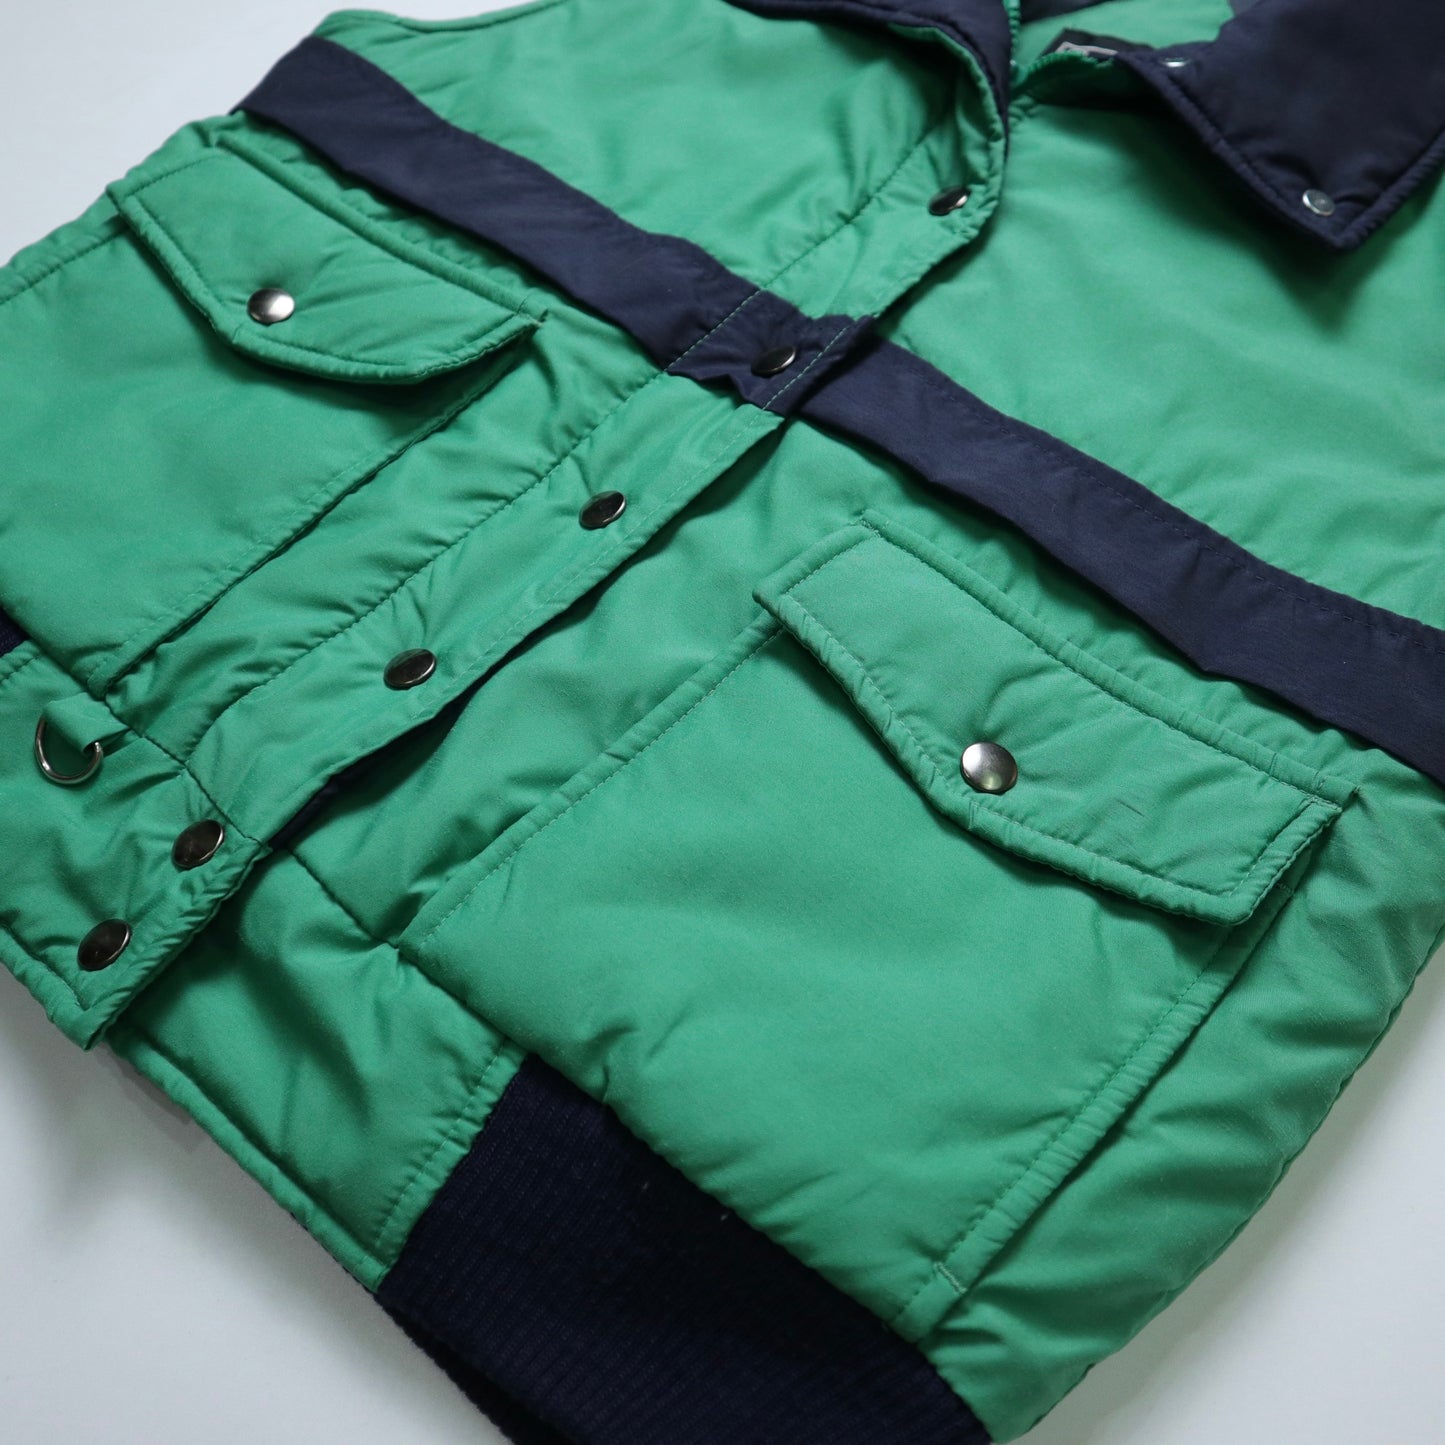 1980s SEARS Puffer Vest blue and green color matching thermal vest